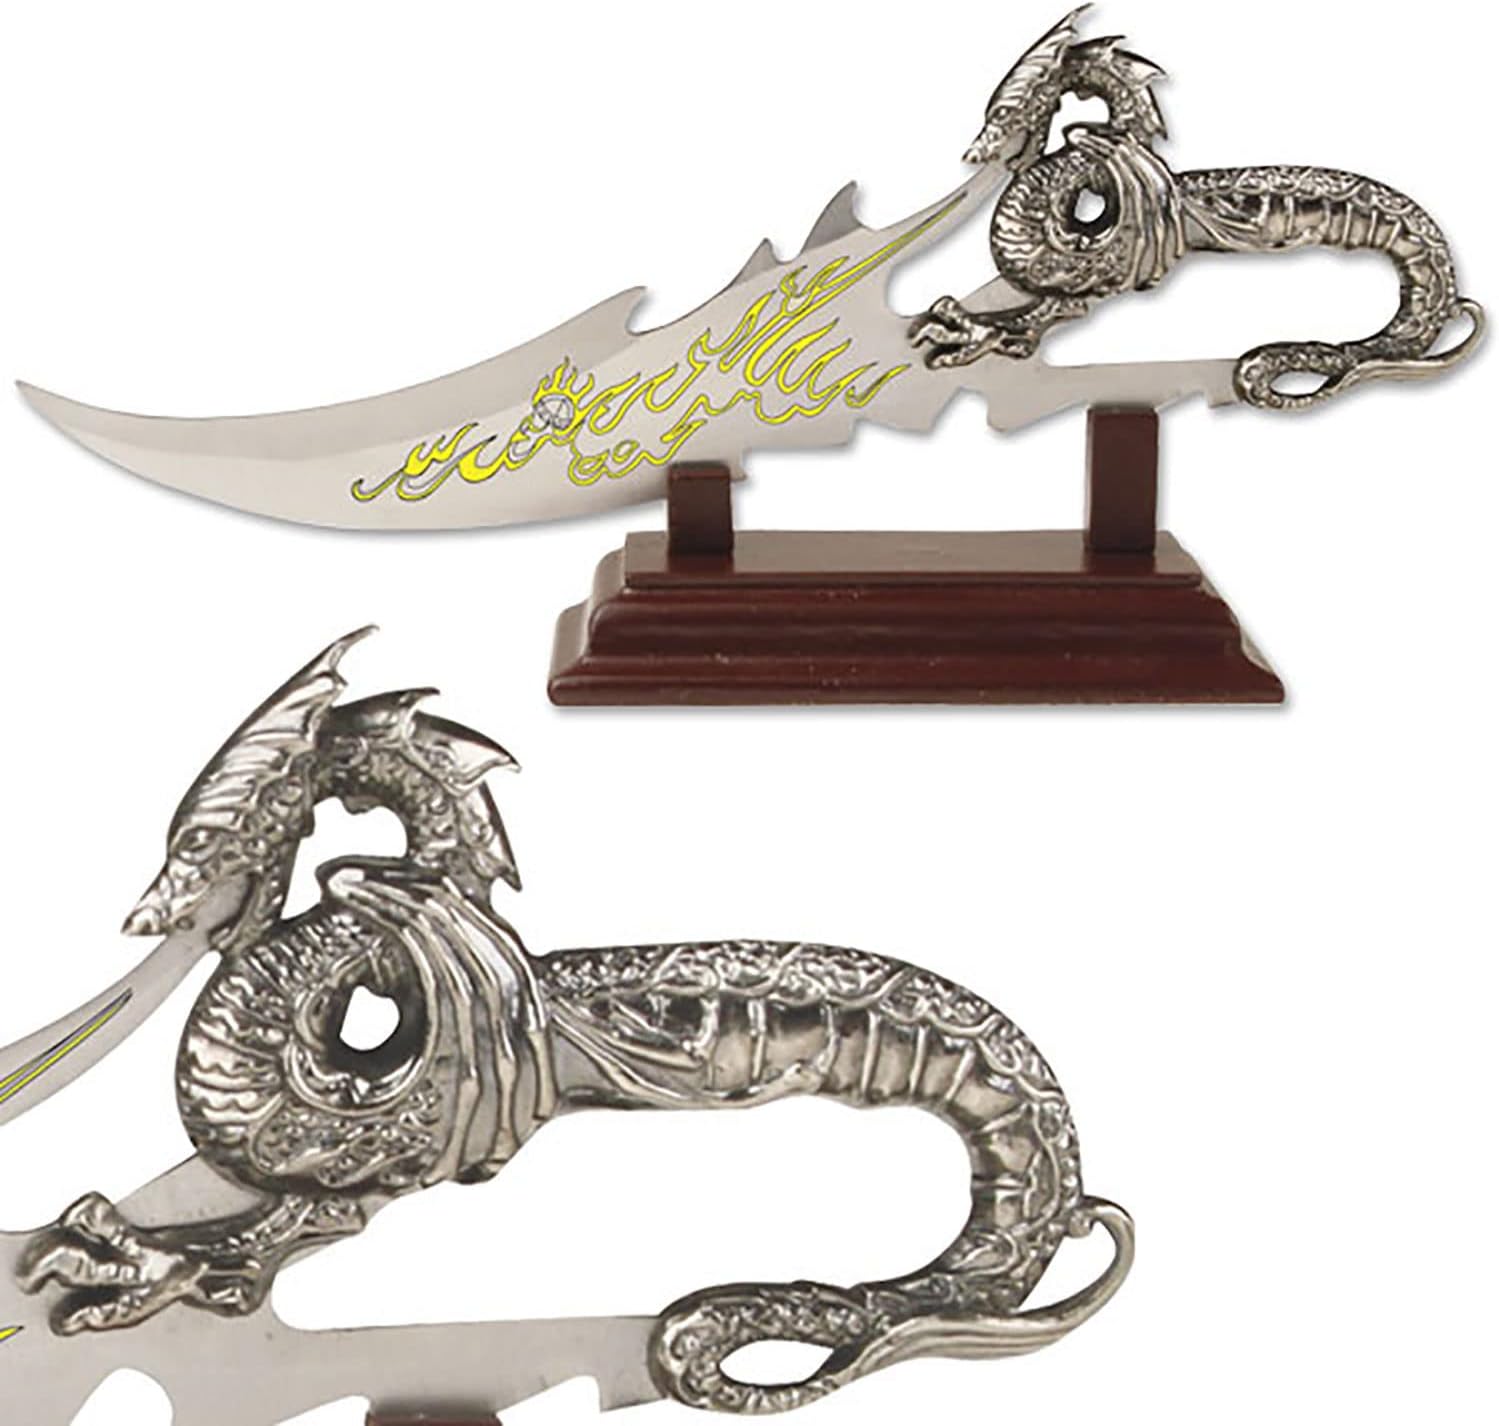 Fantasy Dragon Knife with Wood Display Stand, Silver, 7.5"